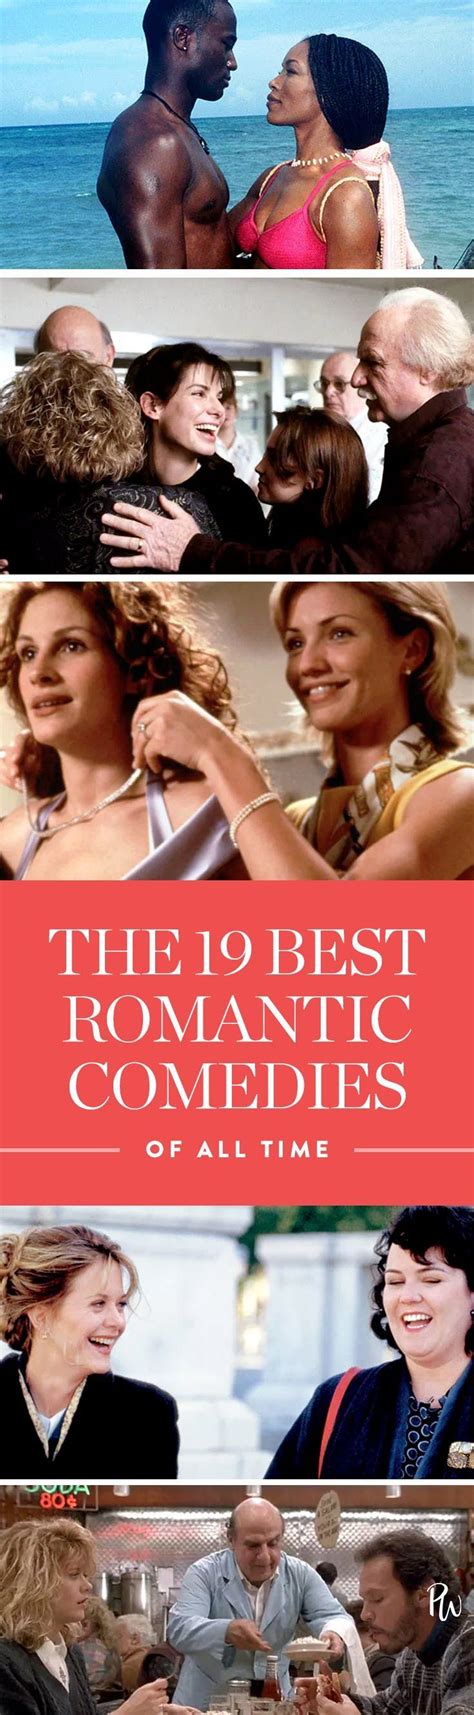 Our guide to the greatest comedy films of all time, part of the guardian and observer's film season 2010 18 october 2010. The 19 Best Romantic Comedies of All Time | Best romantic ...